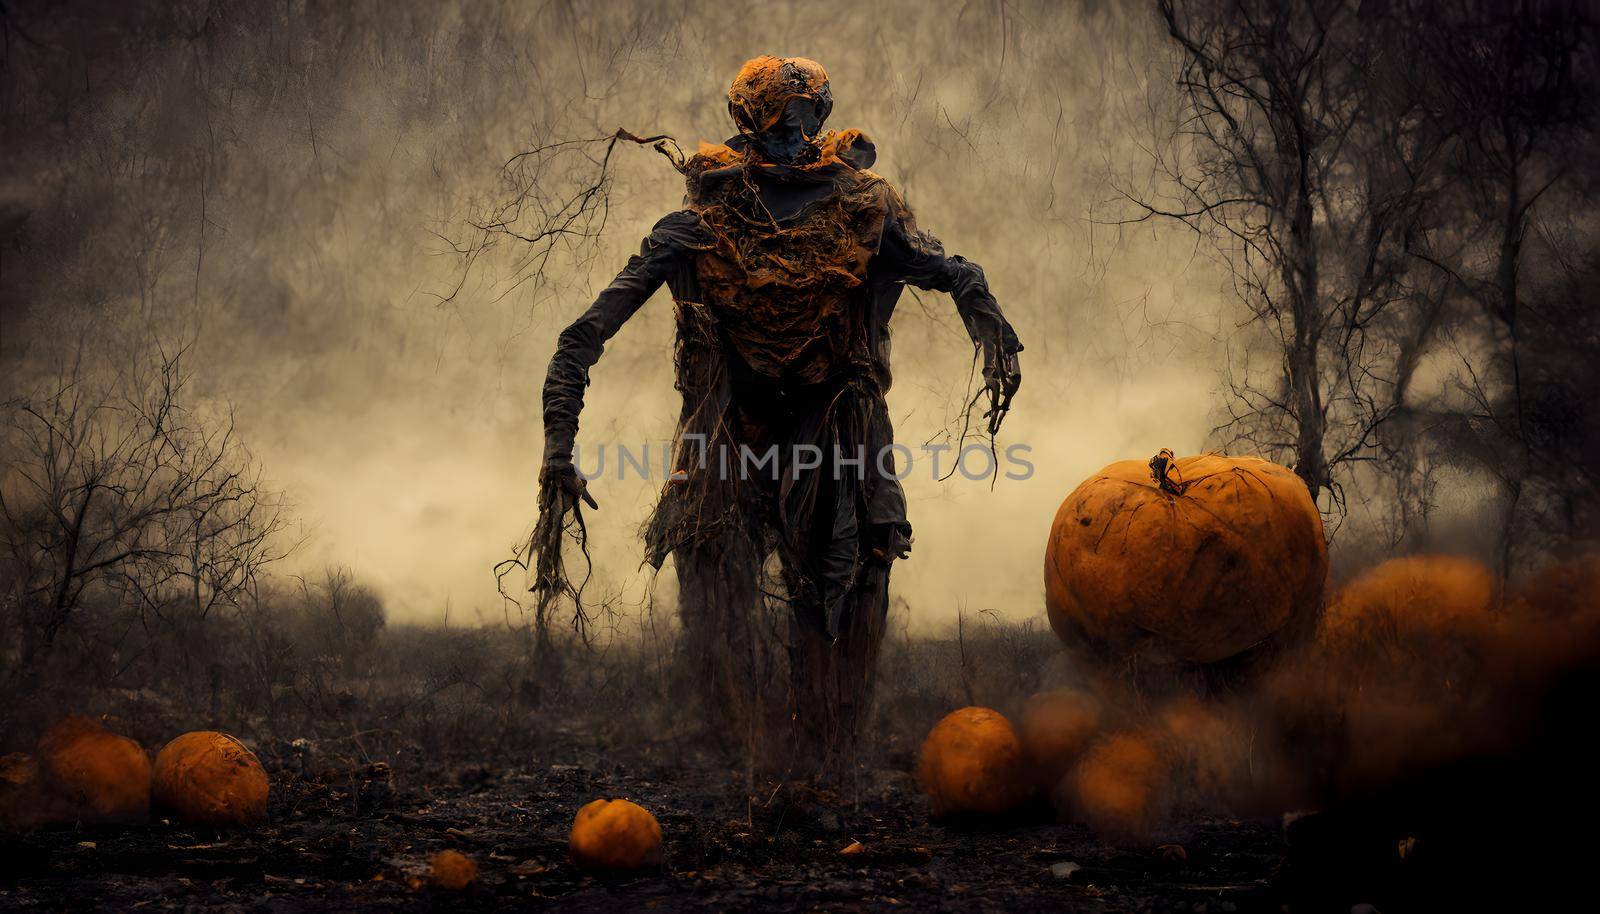 scary pumpkin head halloween monster portrait, neural network generated art. Digitally generated image. Not based on any actual scene or pattern.